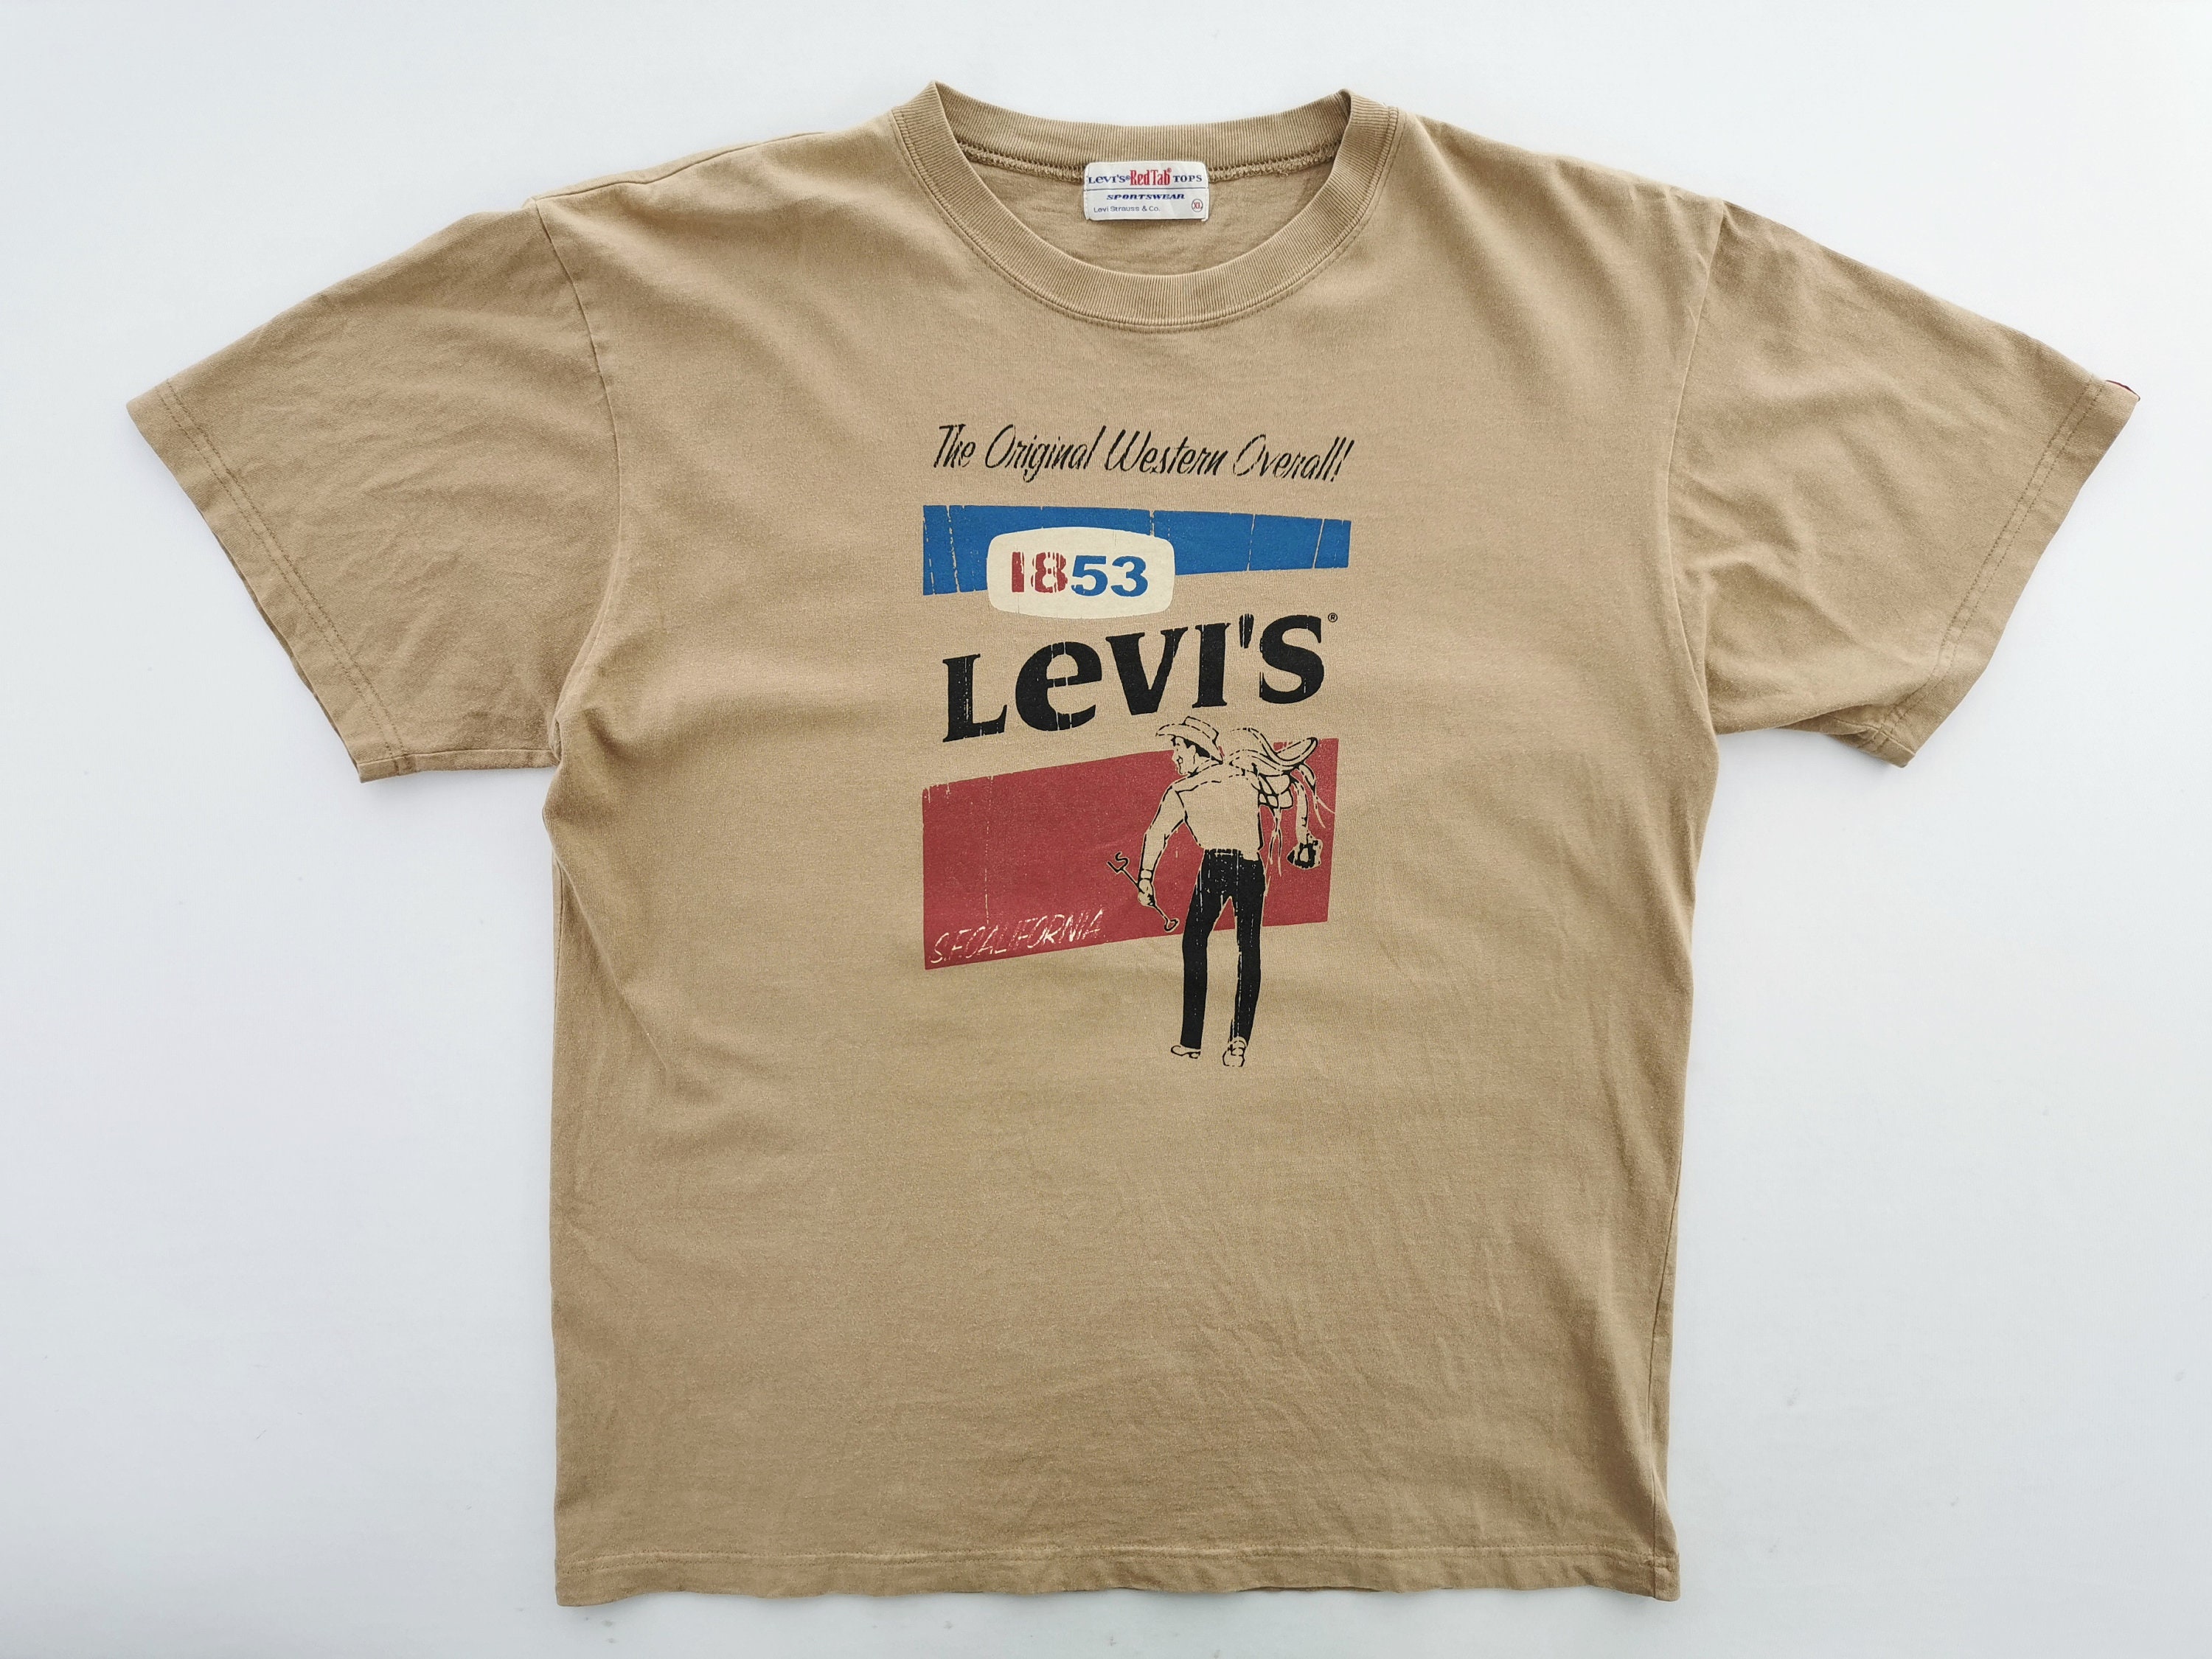 Levi's T-shirt 'Vintage Clothing®' collection